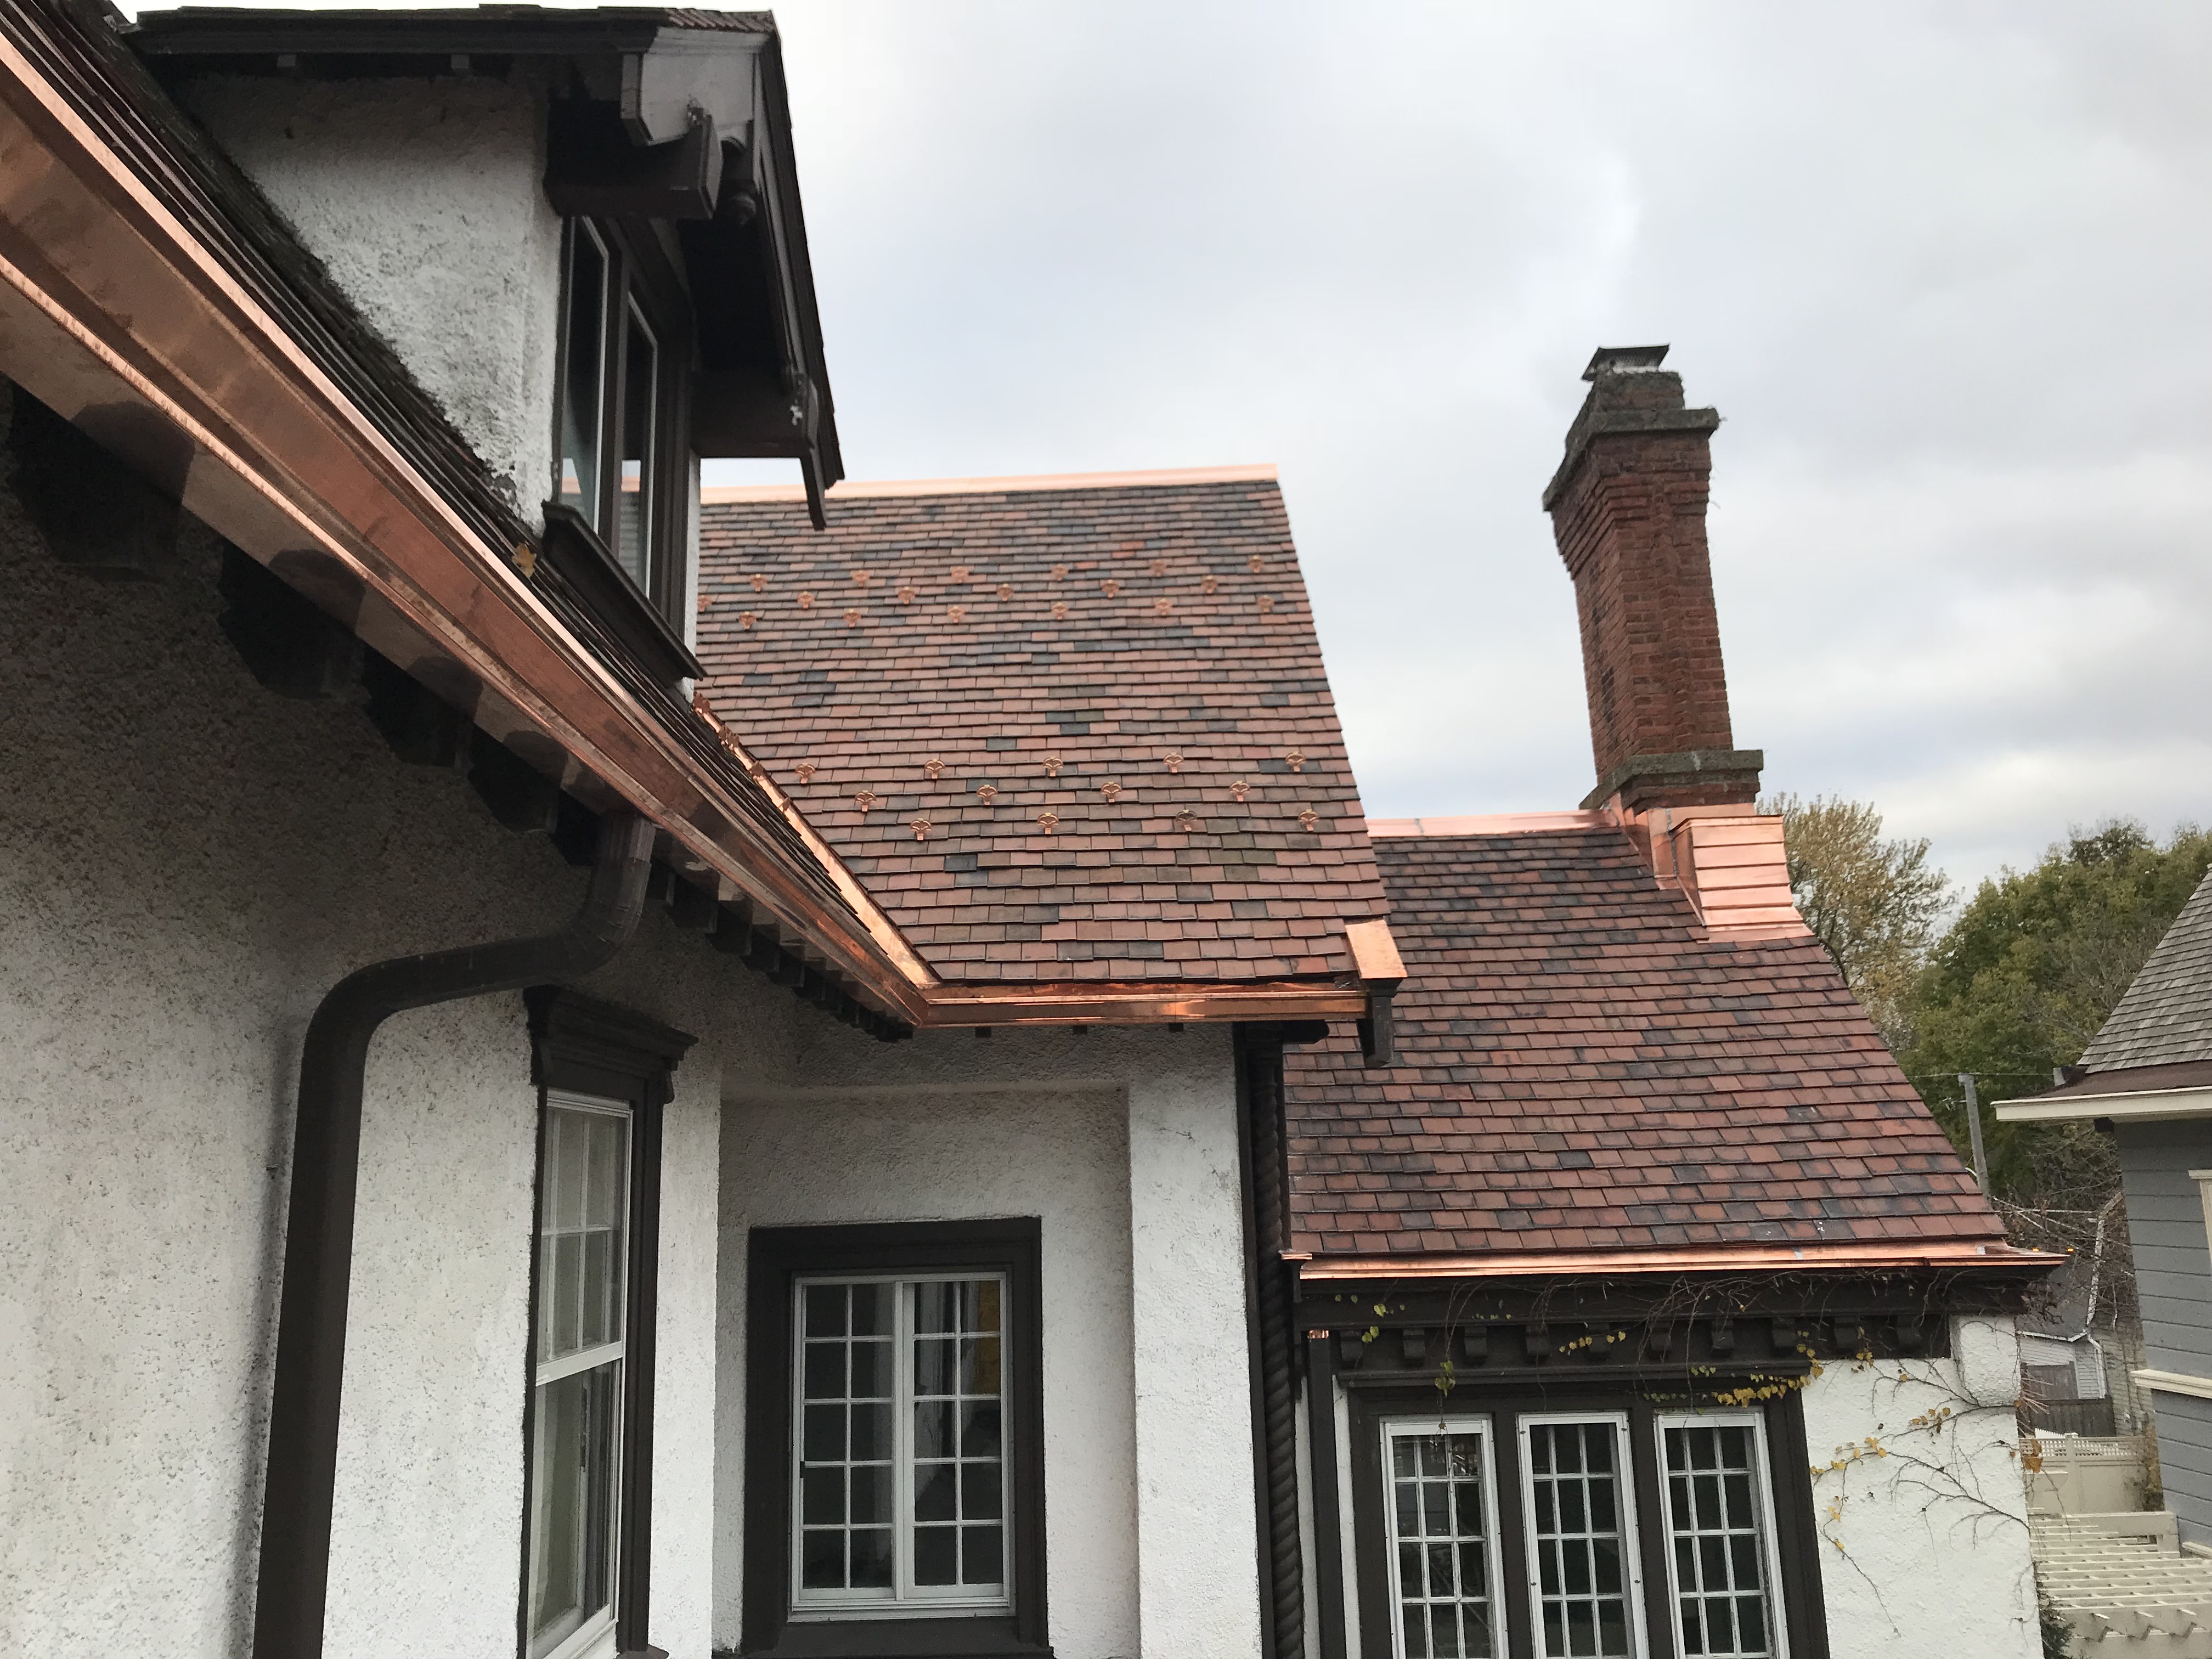 Evanston New Tile Roof with Copper Valley, Gutter and Snow Guards